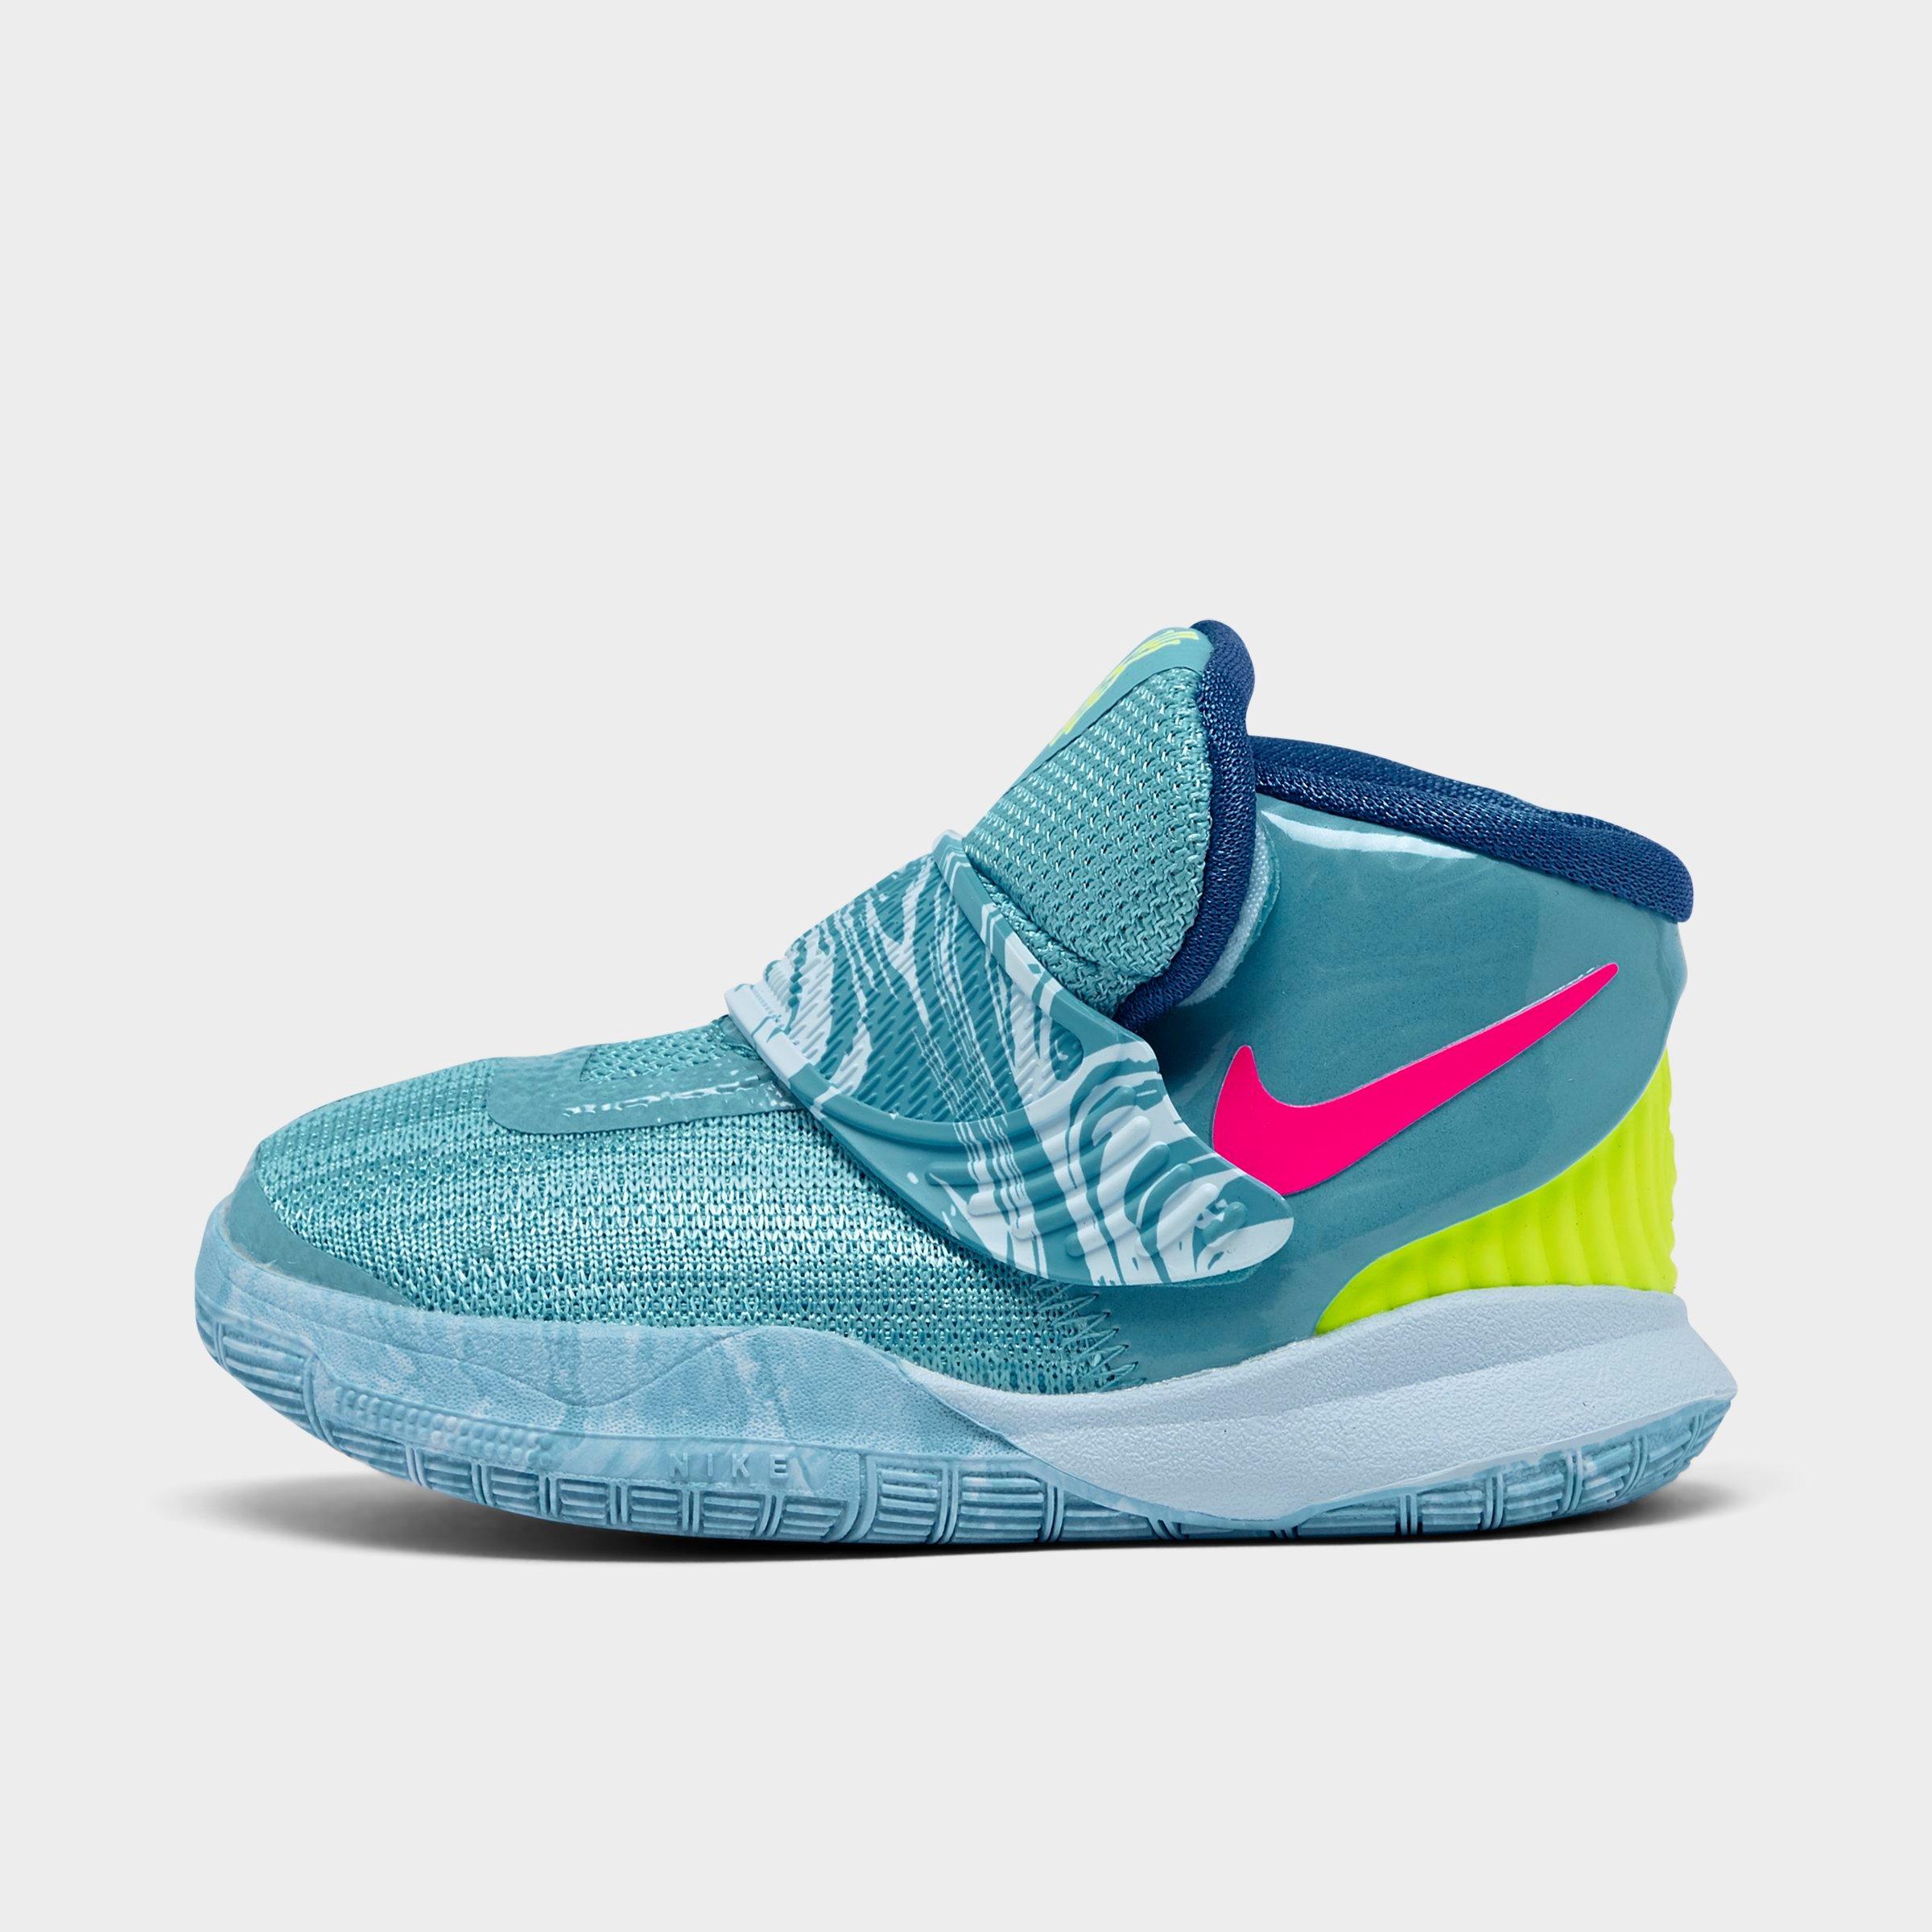 kyrie finish line